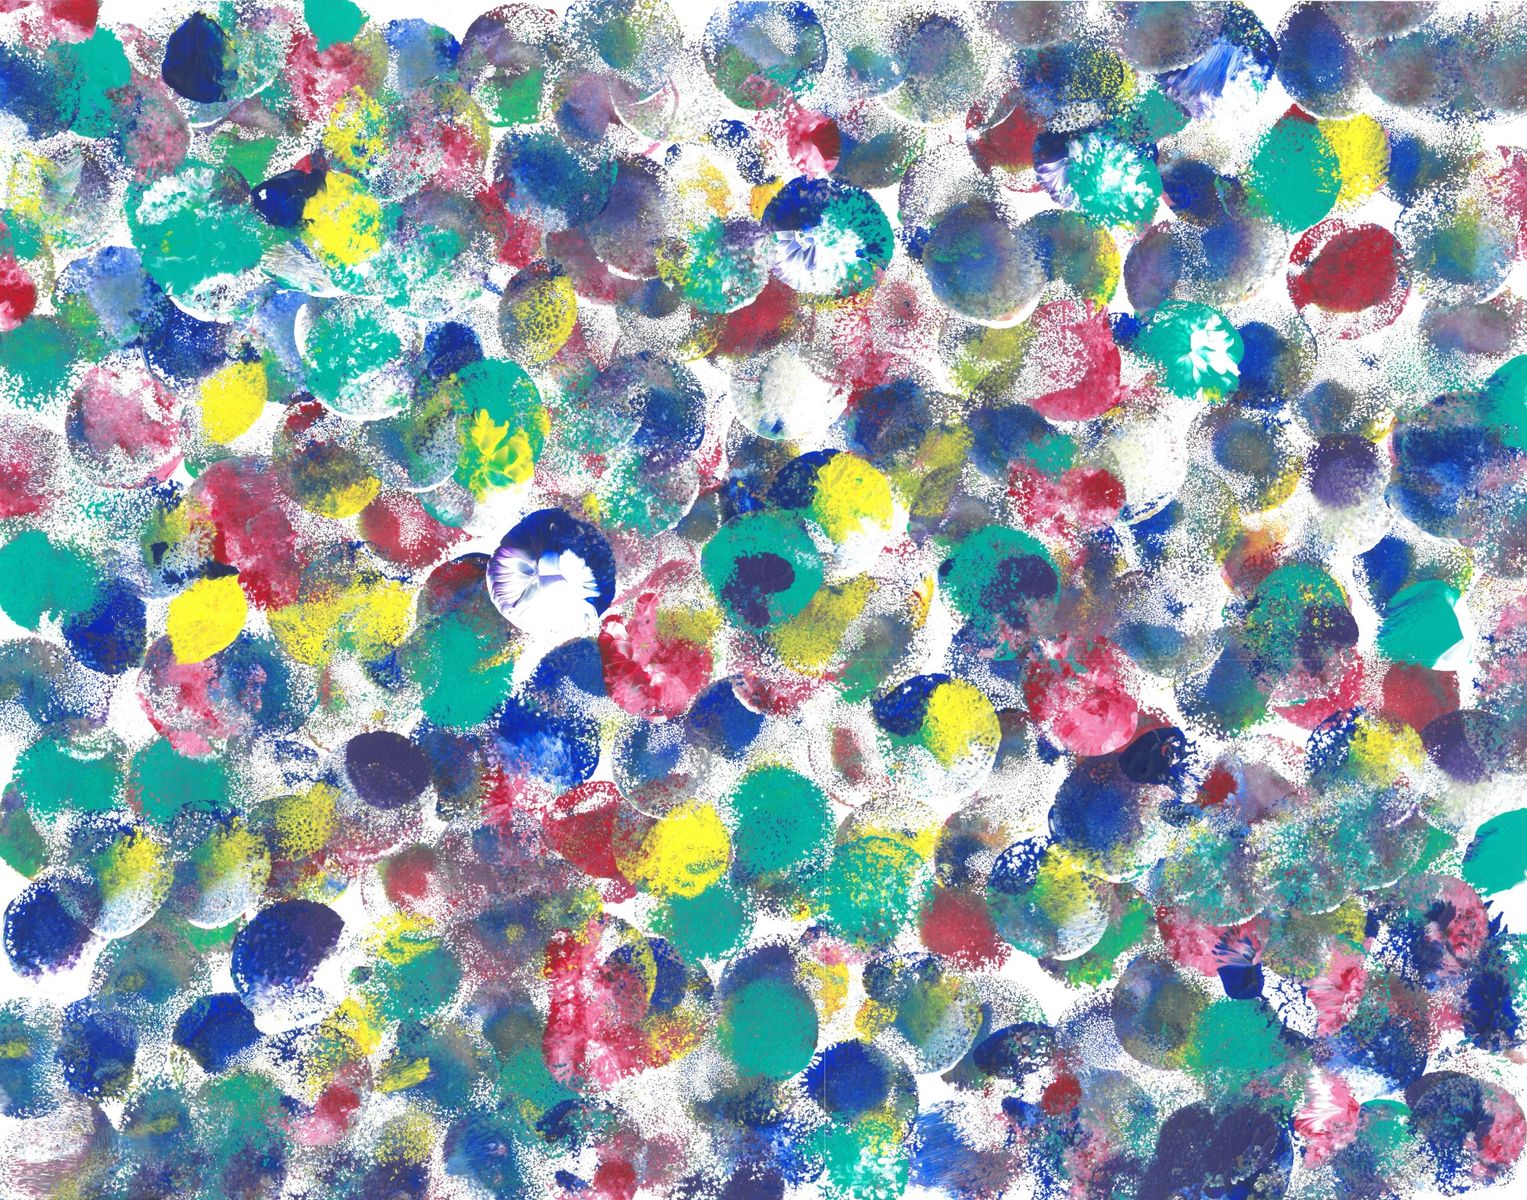 On a white background are circles of aqua, dark blue, deep red, gray, and yellow. Some of the circles have a mottled, dotted surface. 